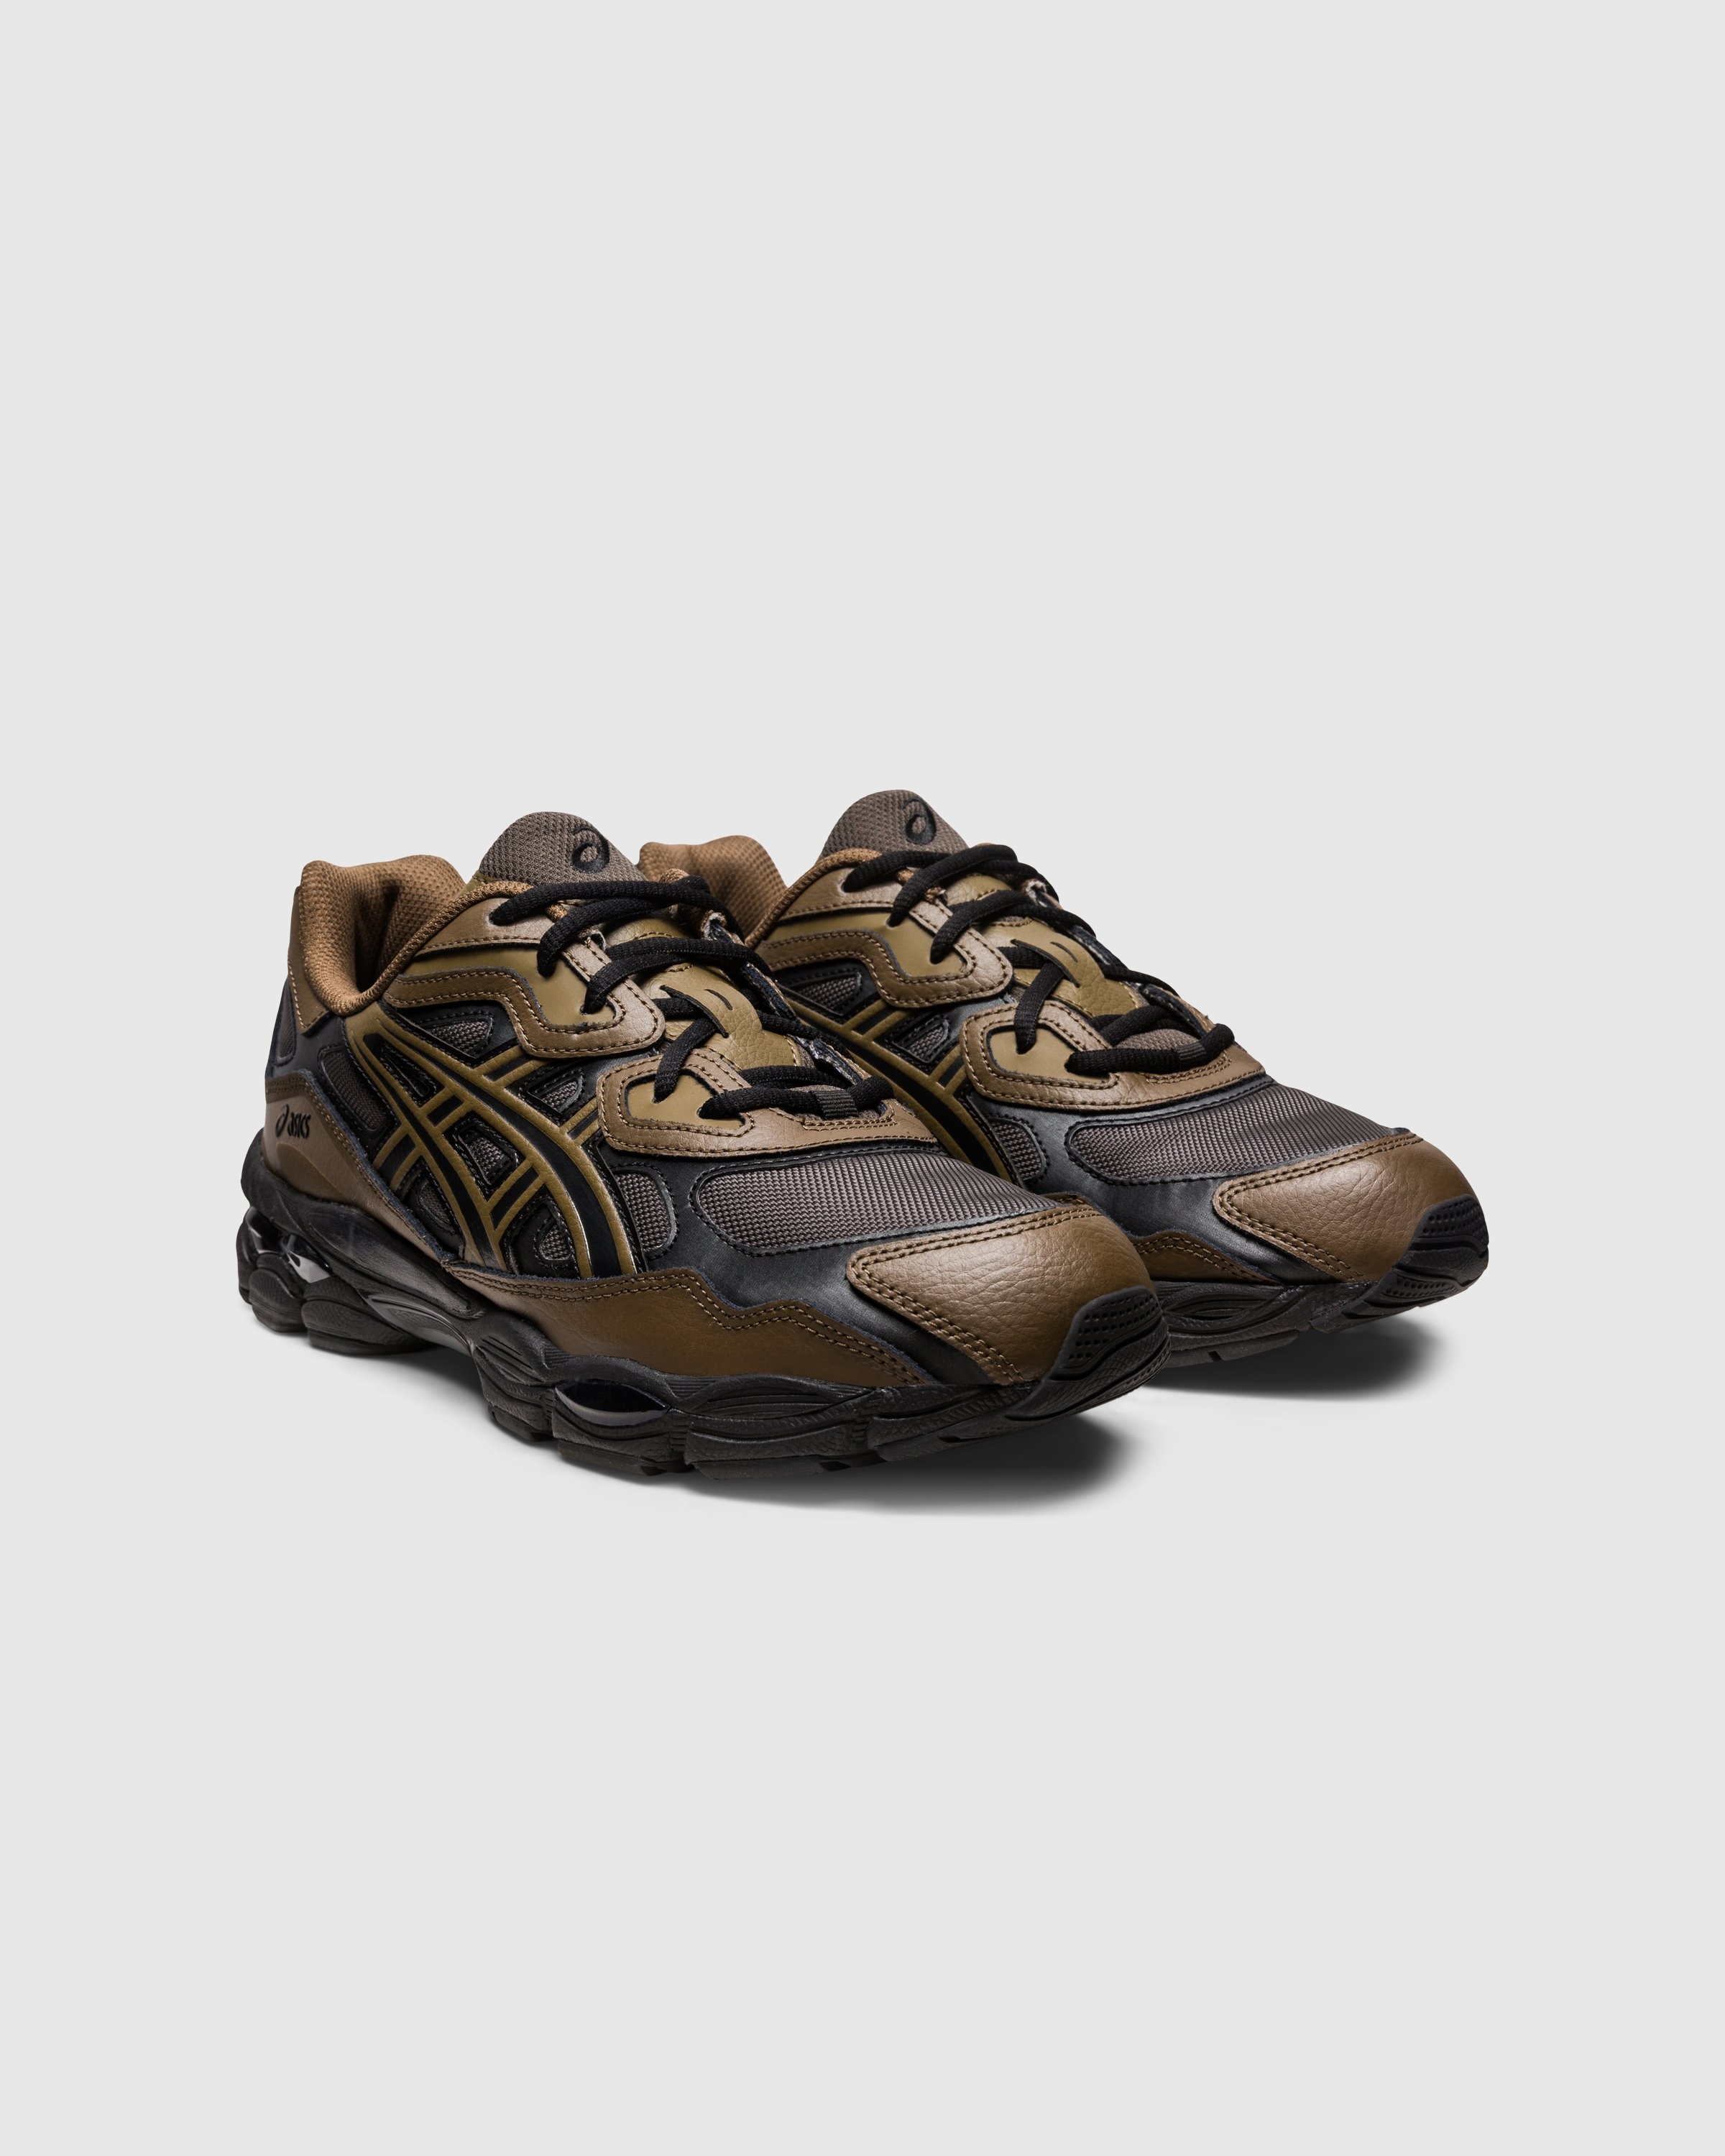 asics – GEL-NYC Dark Sepia/Clay Canyon - Sneakers - Multi - Image 3